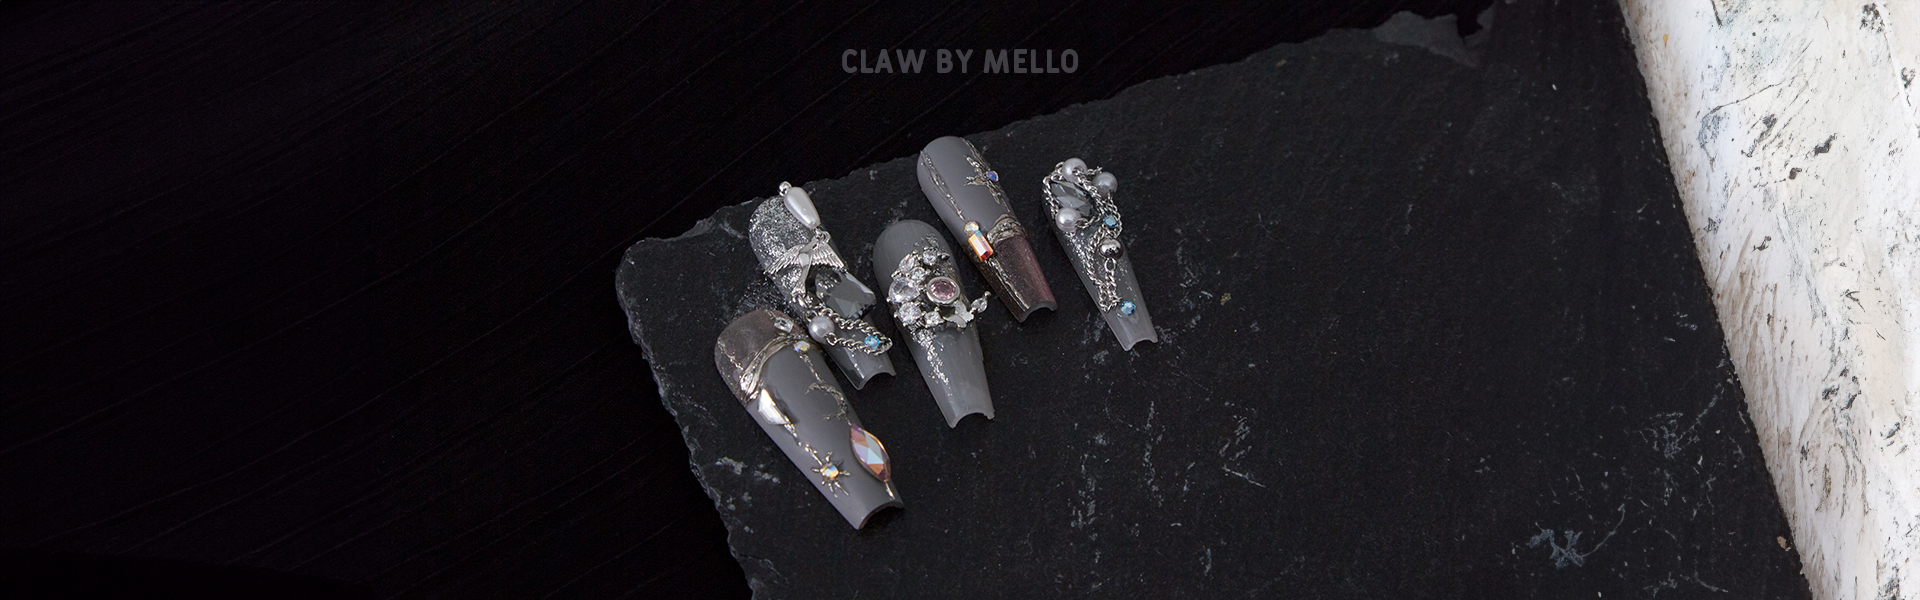 CLAW BY MELLO